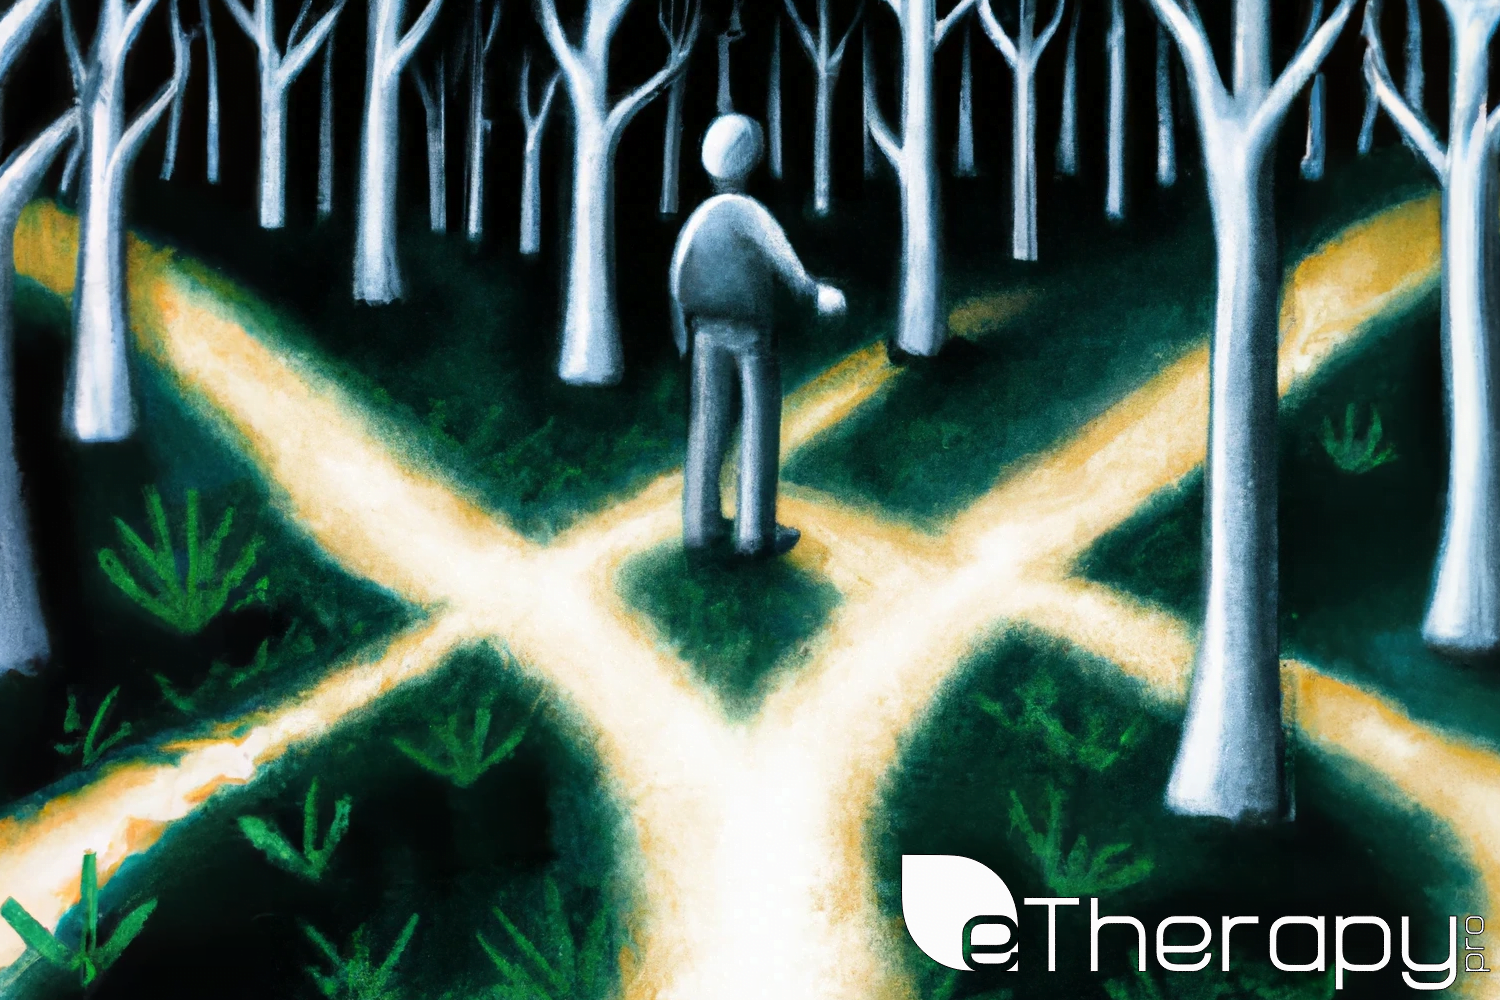 Depict a figure standing at a crossroads - Understanding Coping Mechanisms in Individuals with Trust Issues